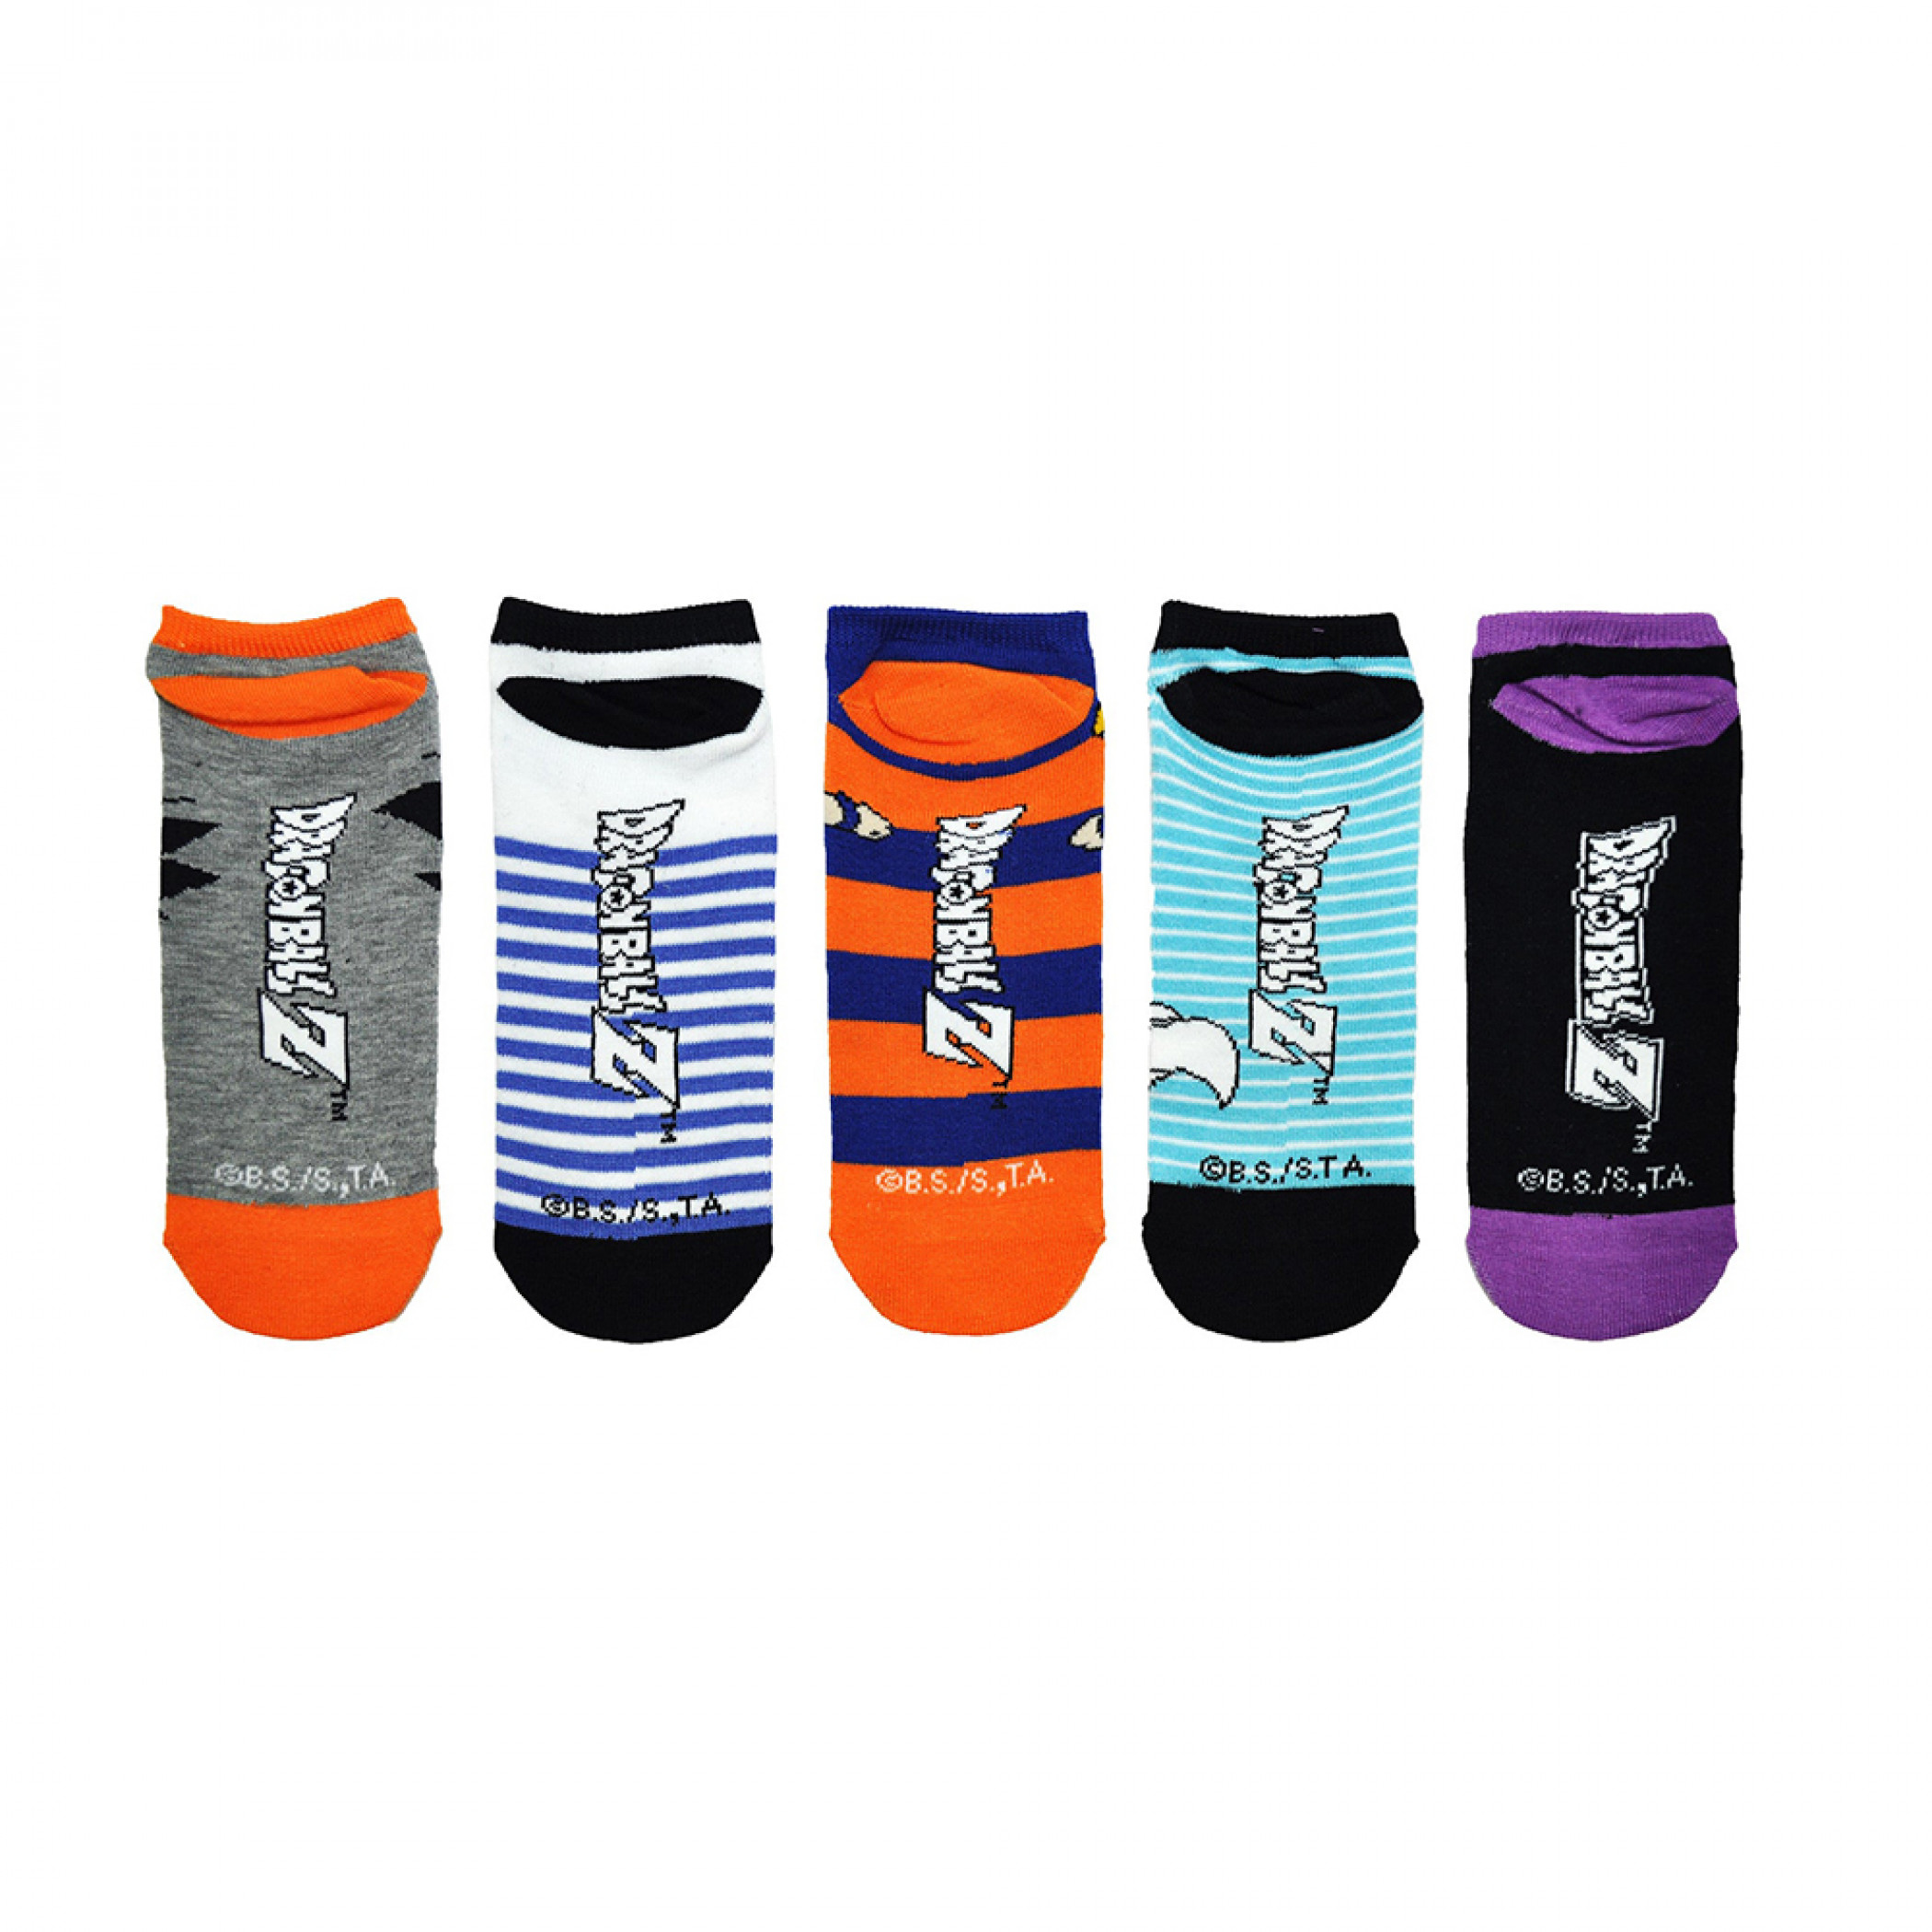 Dragon Ball Z Character Variety 5-Pair Pack of Low Cut Socks